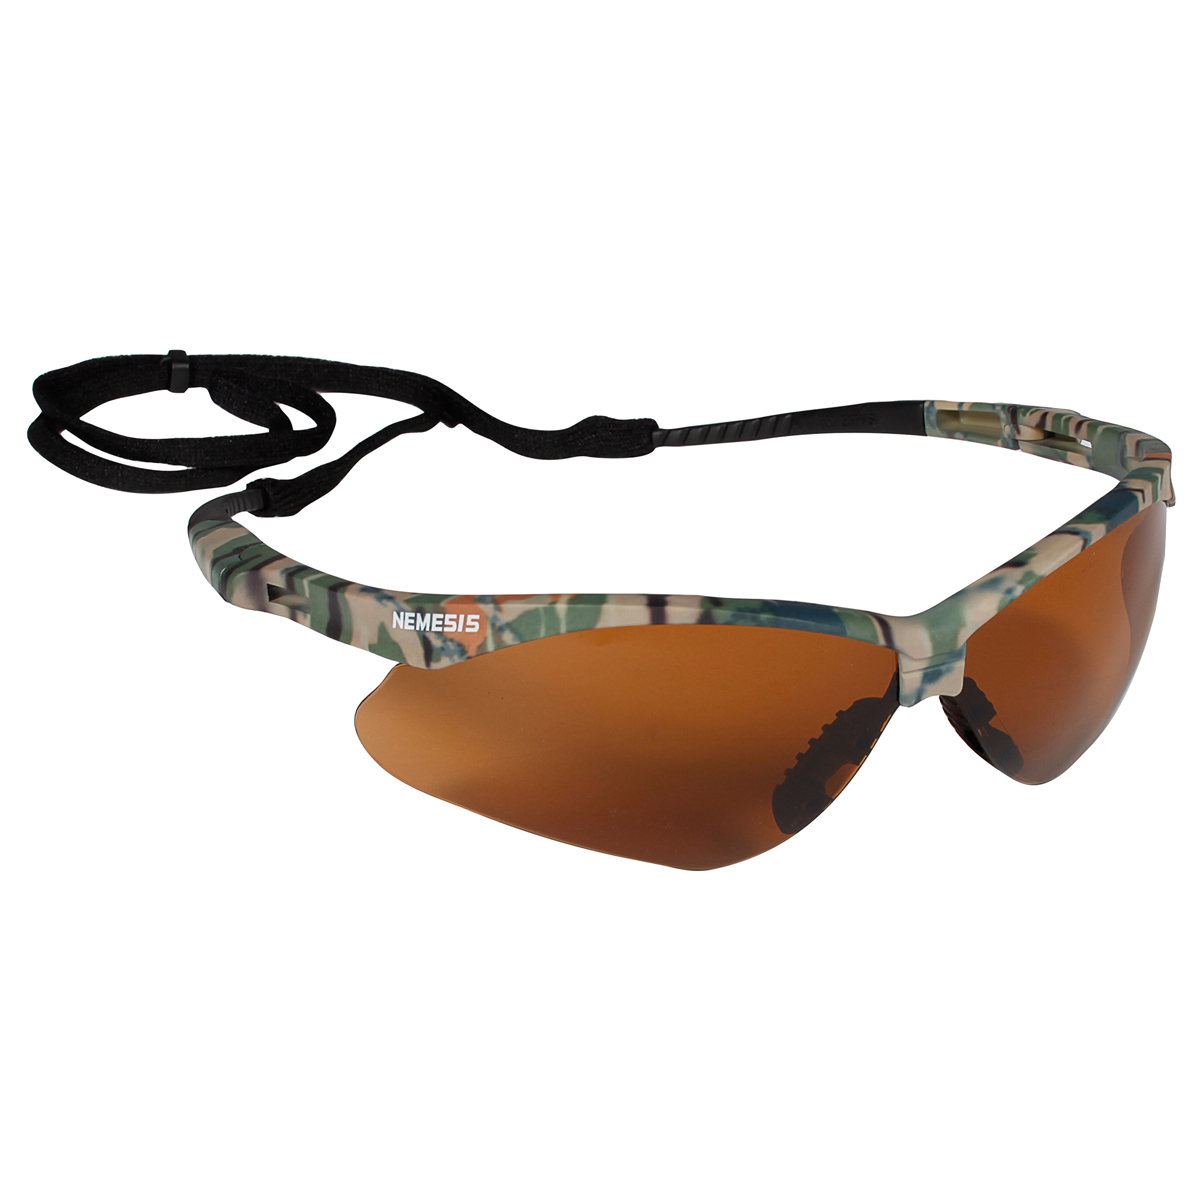 Kimberly-Clark Professional* KleenGuard™ Nemesis* Camo Safety Glasses With Bronze Hard Coat Lens (Availability restrictions appl